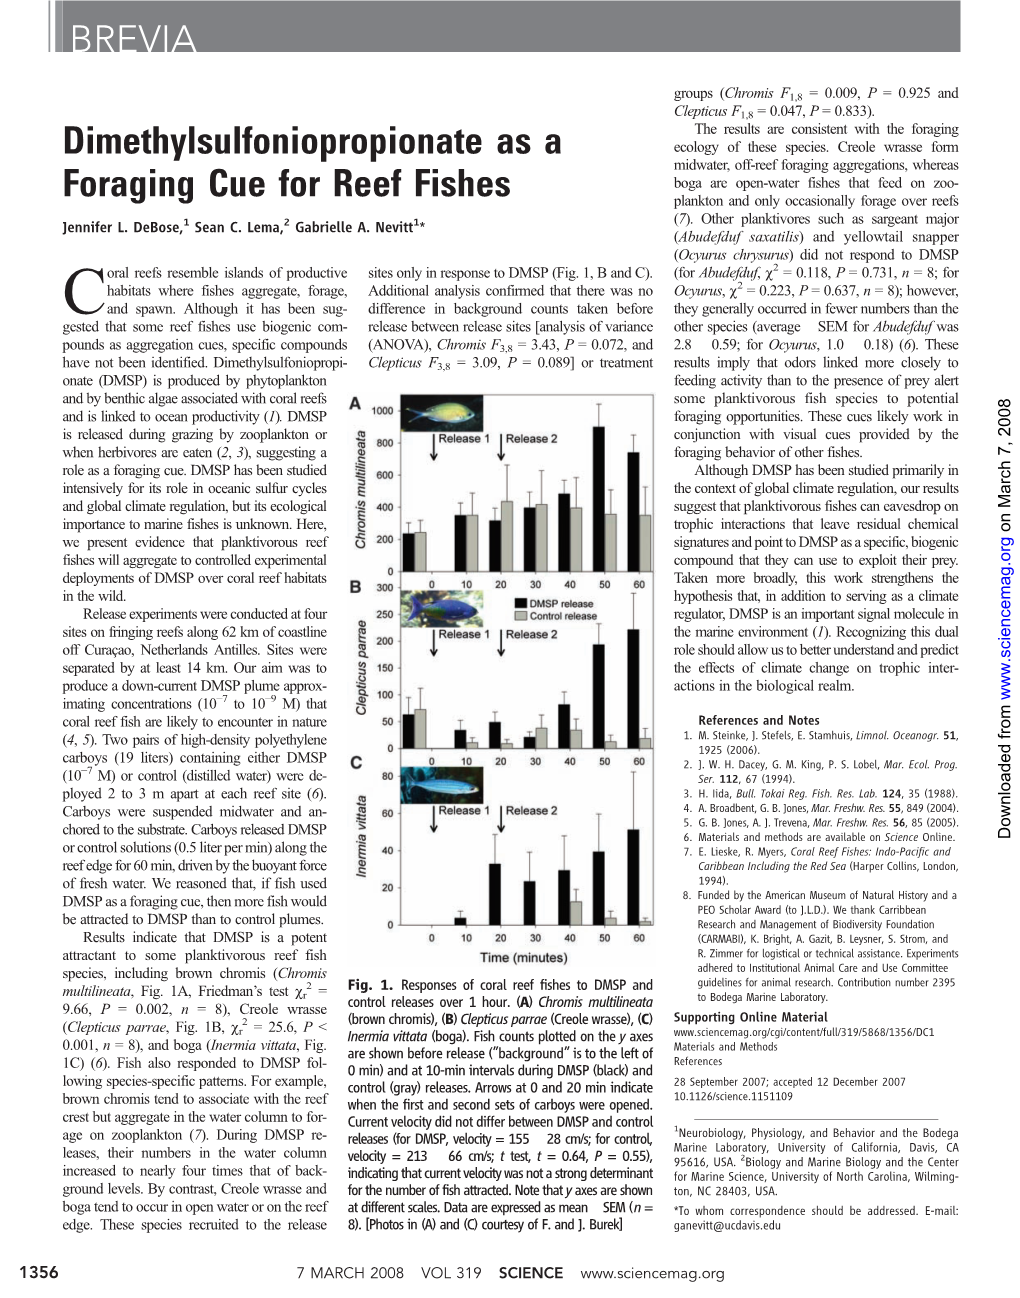 Dimethylsulfoniopropionate As a Foraging Cue for Reef Fishes BREVIA